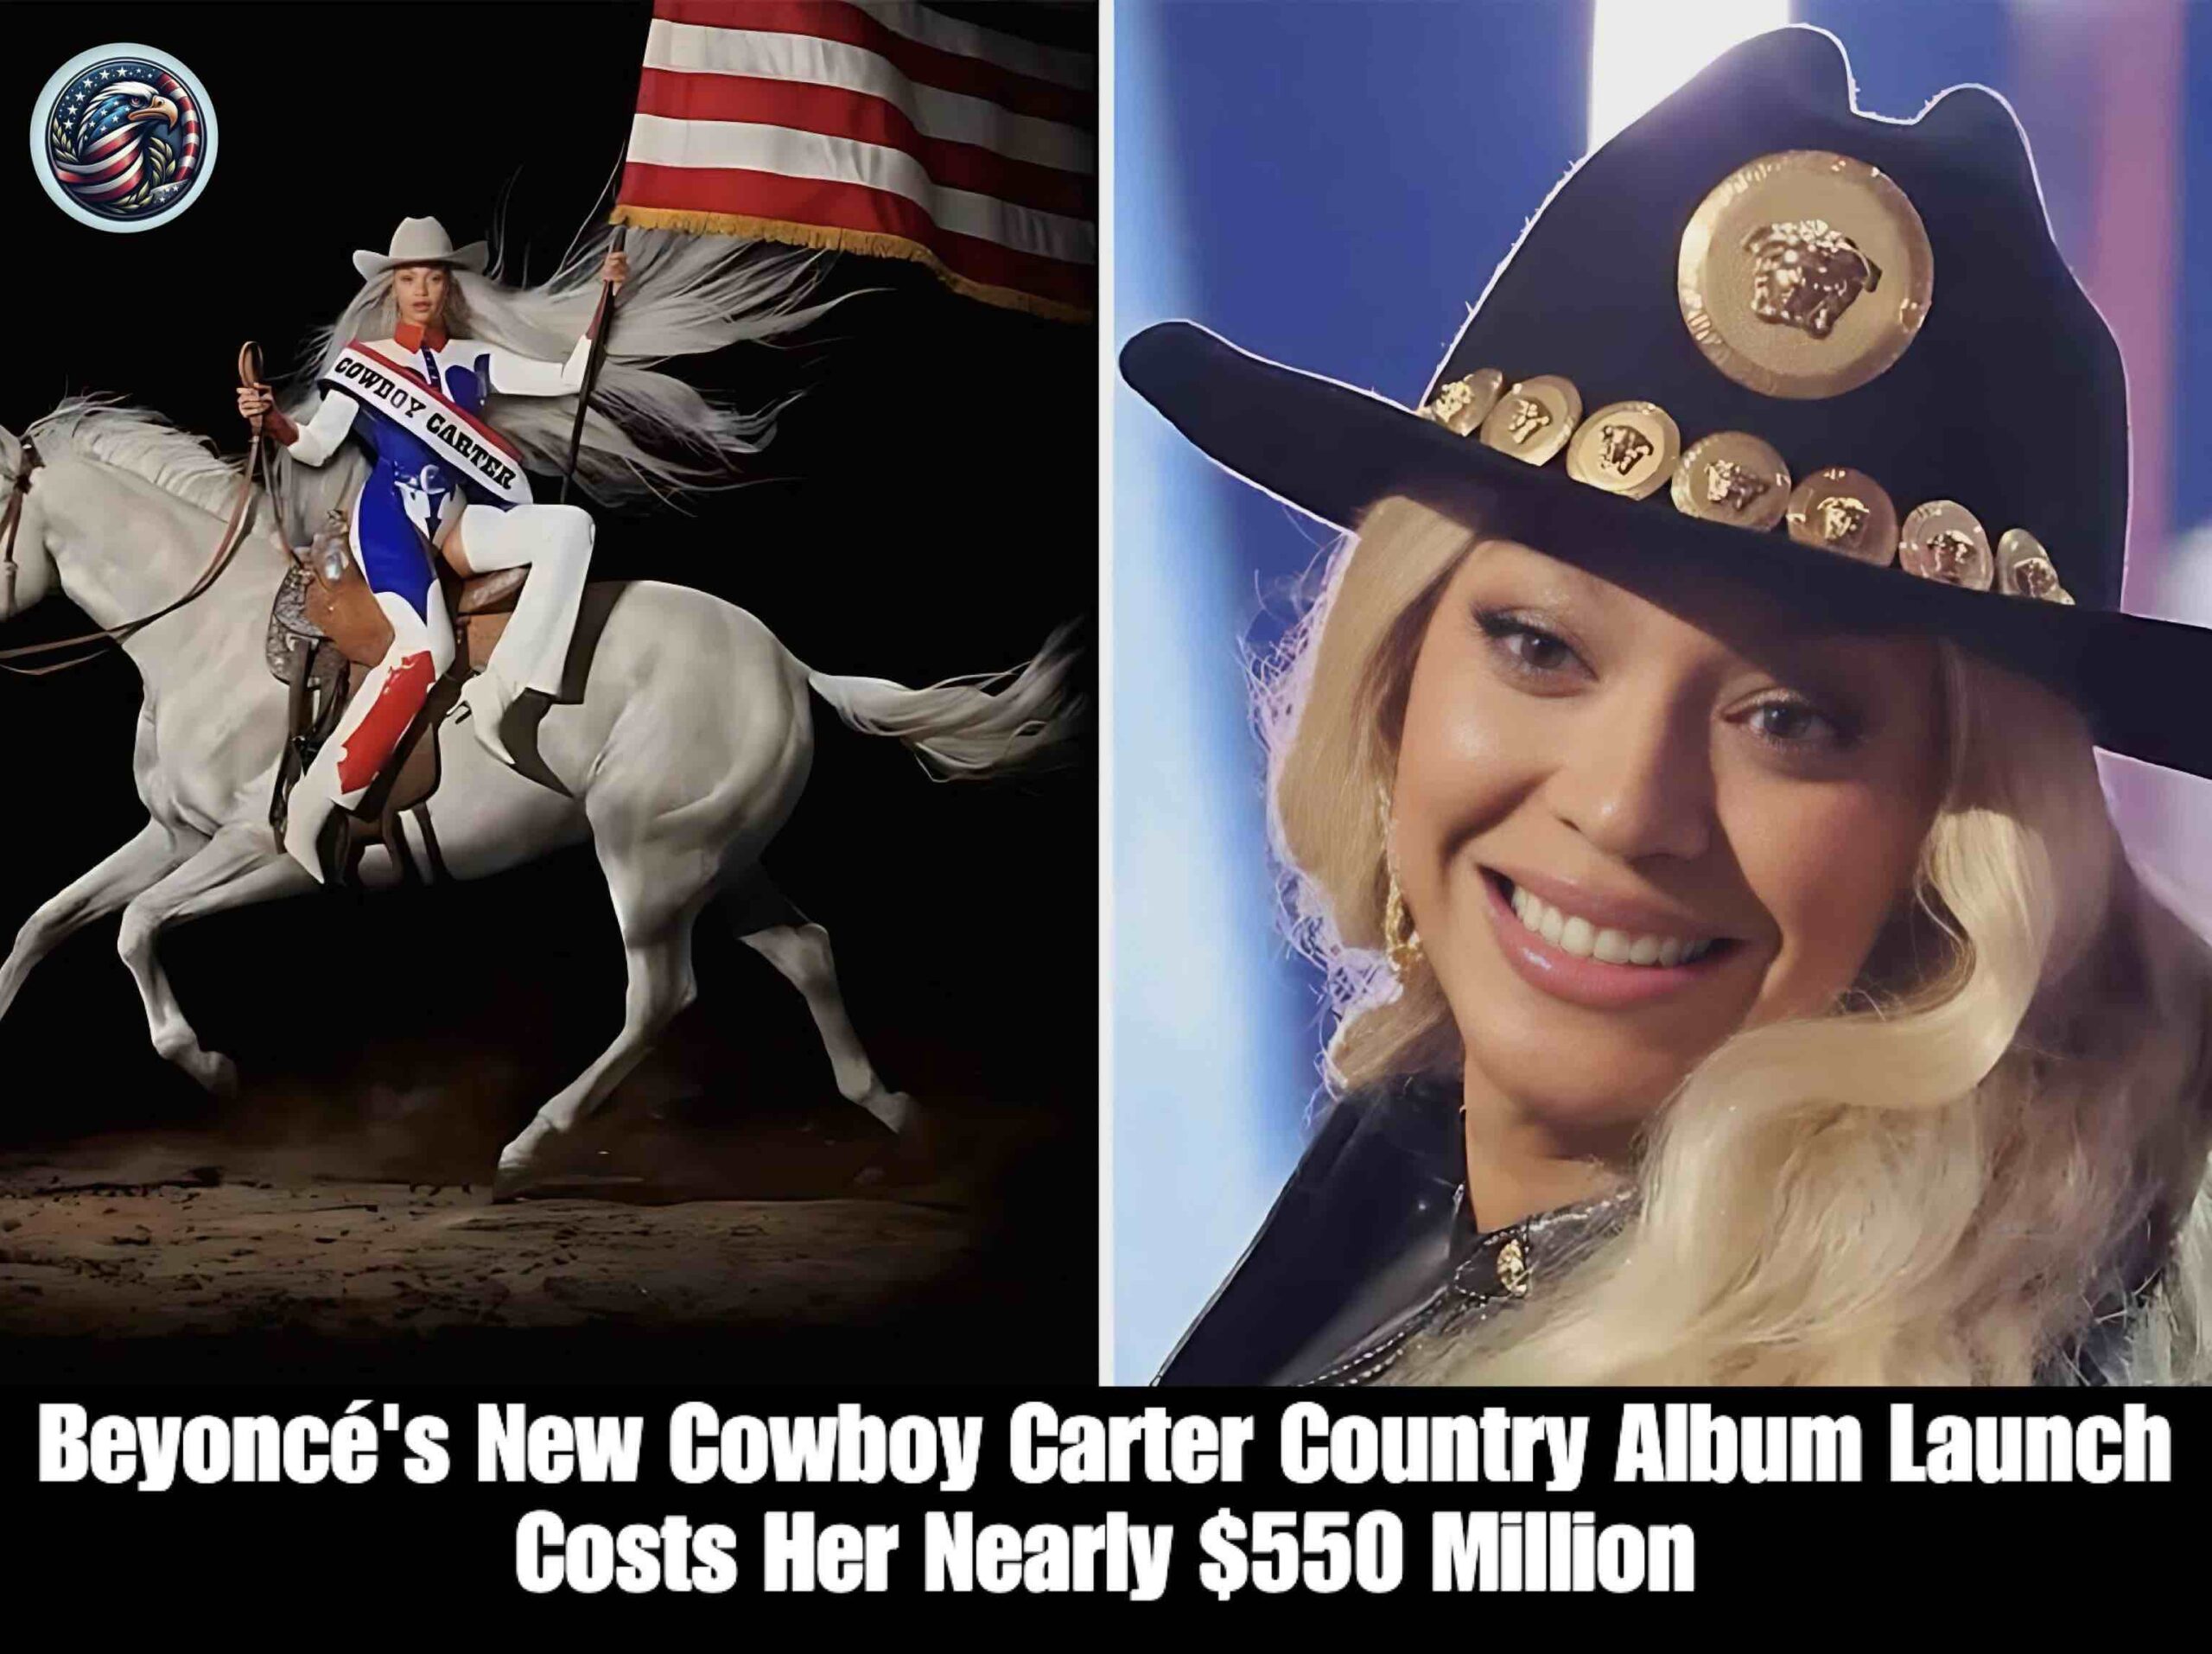 Beyoncé’s New Cowboy Carter Country Album Launch Costs Her Nearly $550 Million